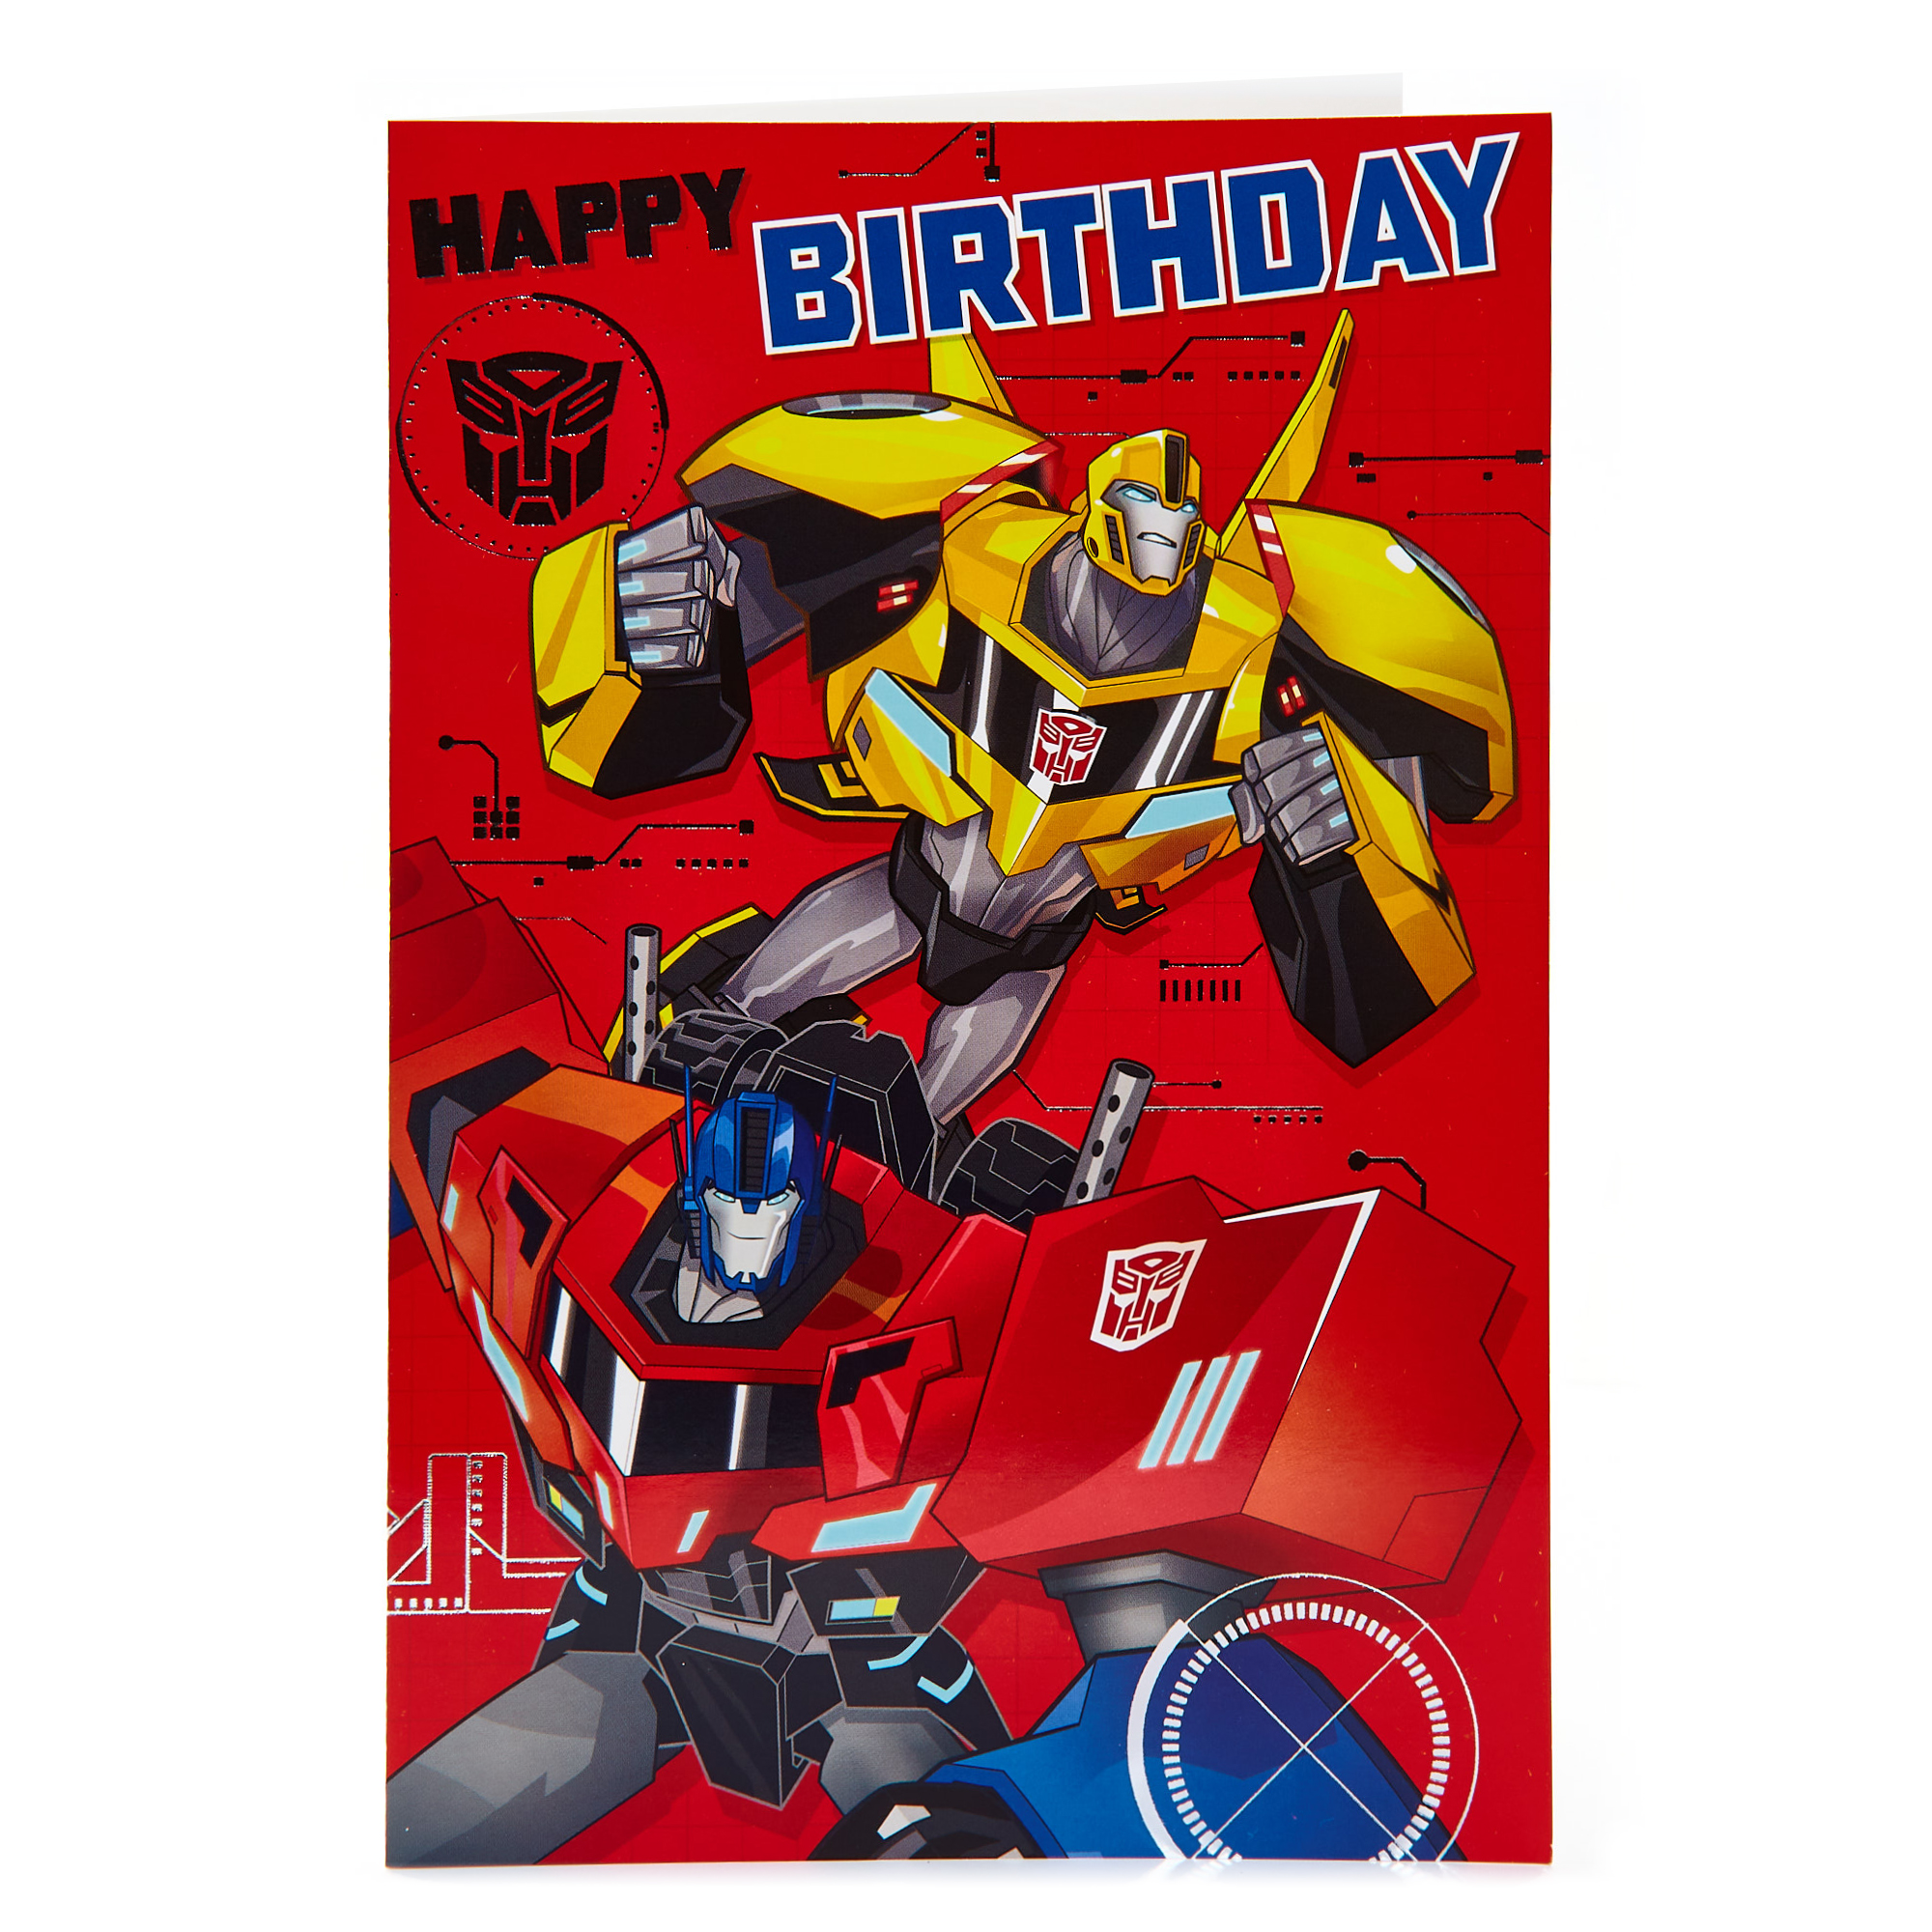 Transformers Birthday Card - Colour Me In